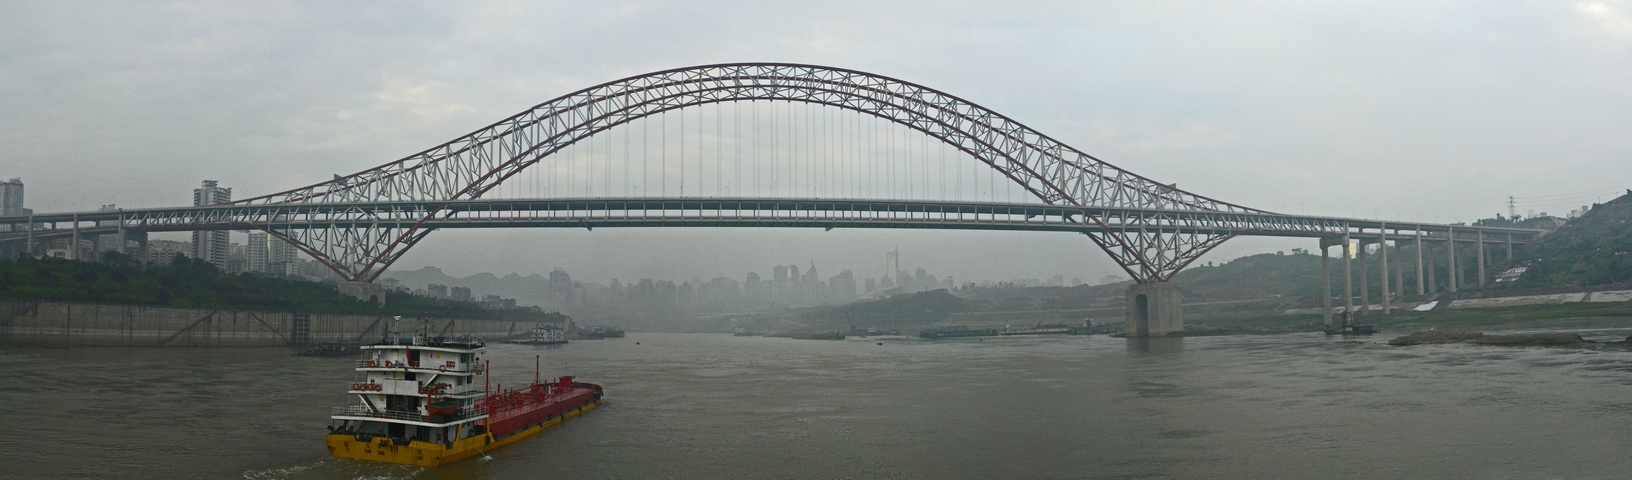 Chongqing03.jpg - 3 images, Size: 8611 x 2532, FOV: 111.00 x 31.78, RMS: 2.40, Lens: Standard, Projection: Cylindrical, Color: LDR